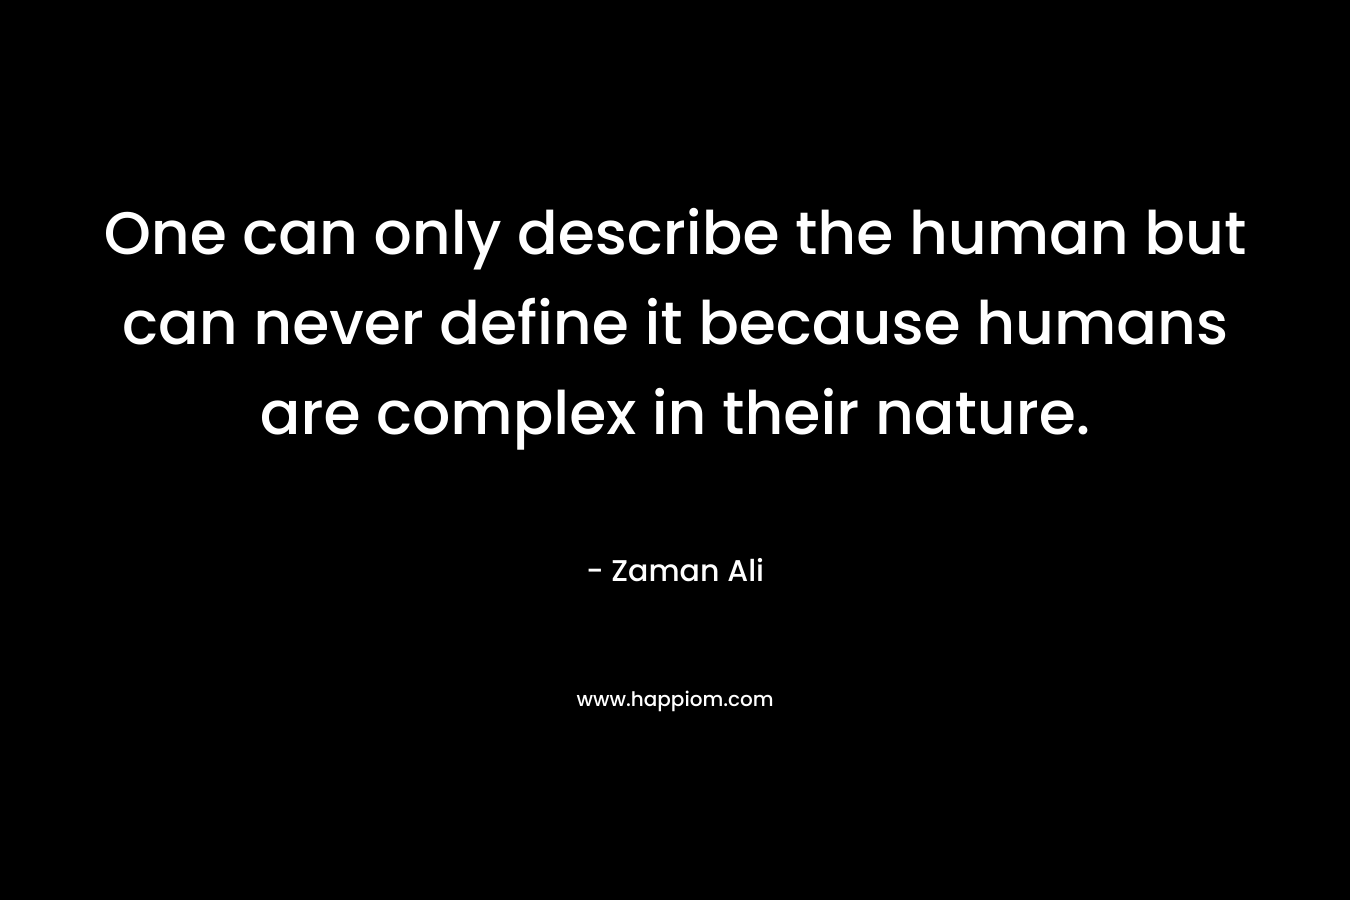 One can only describe the human but can never define it because humans are complex in their nature. – Zaman Ali